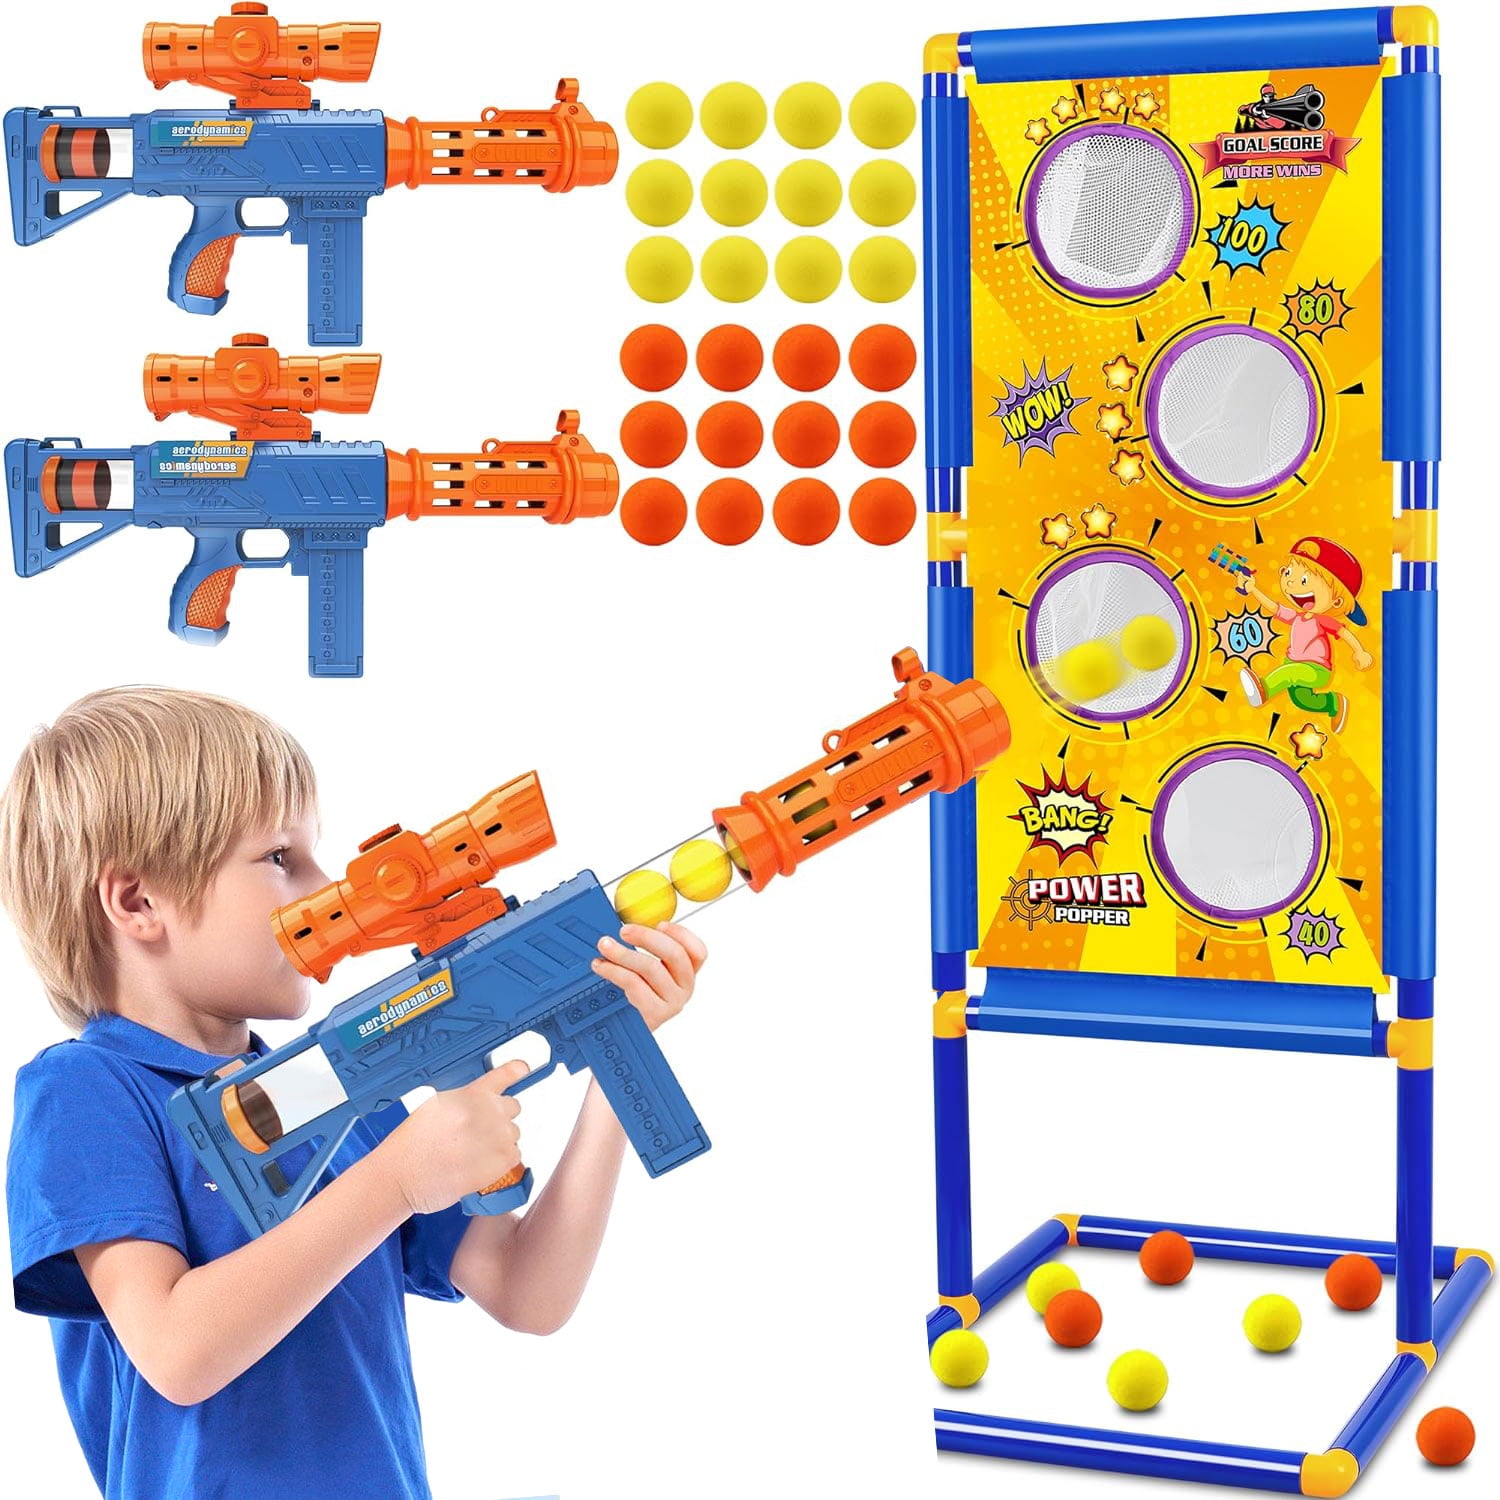 HTB Shooting Game Toy for Age 6, 7, 8, 9, 10+ Years Old Kids Boys